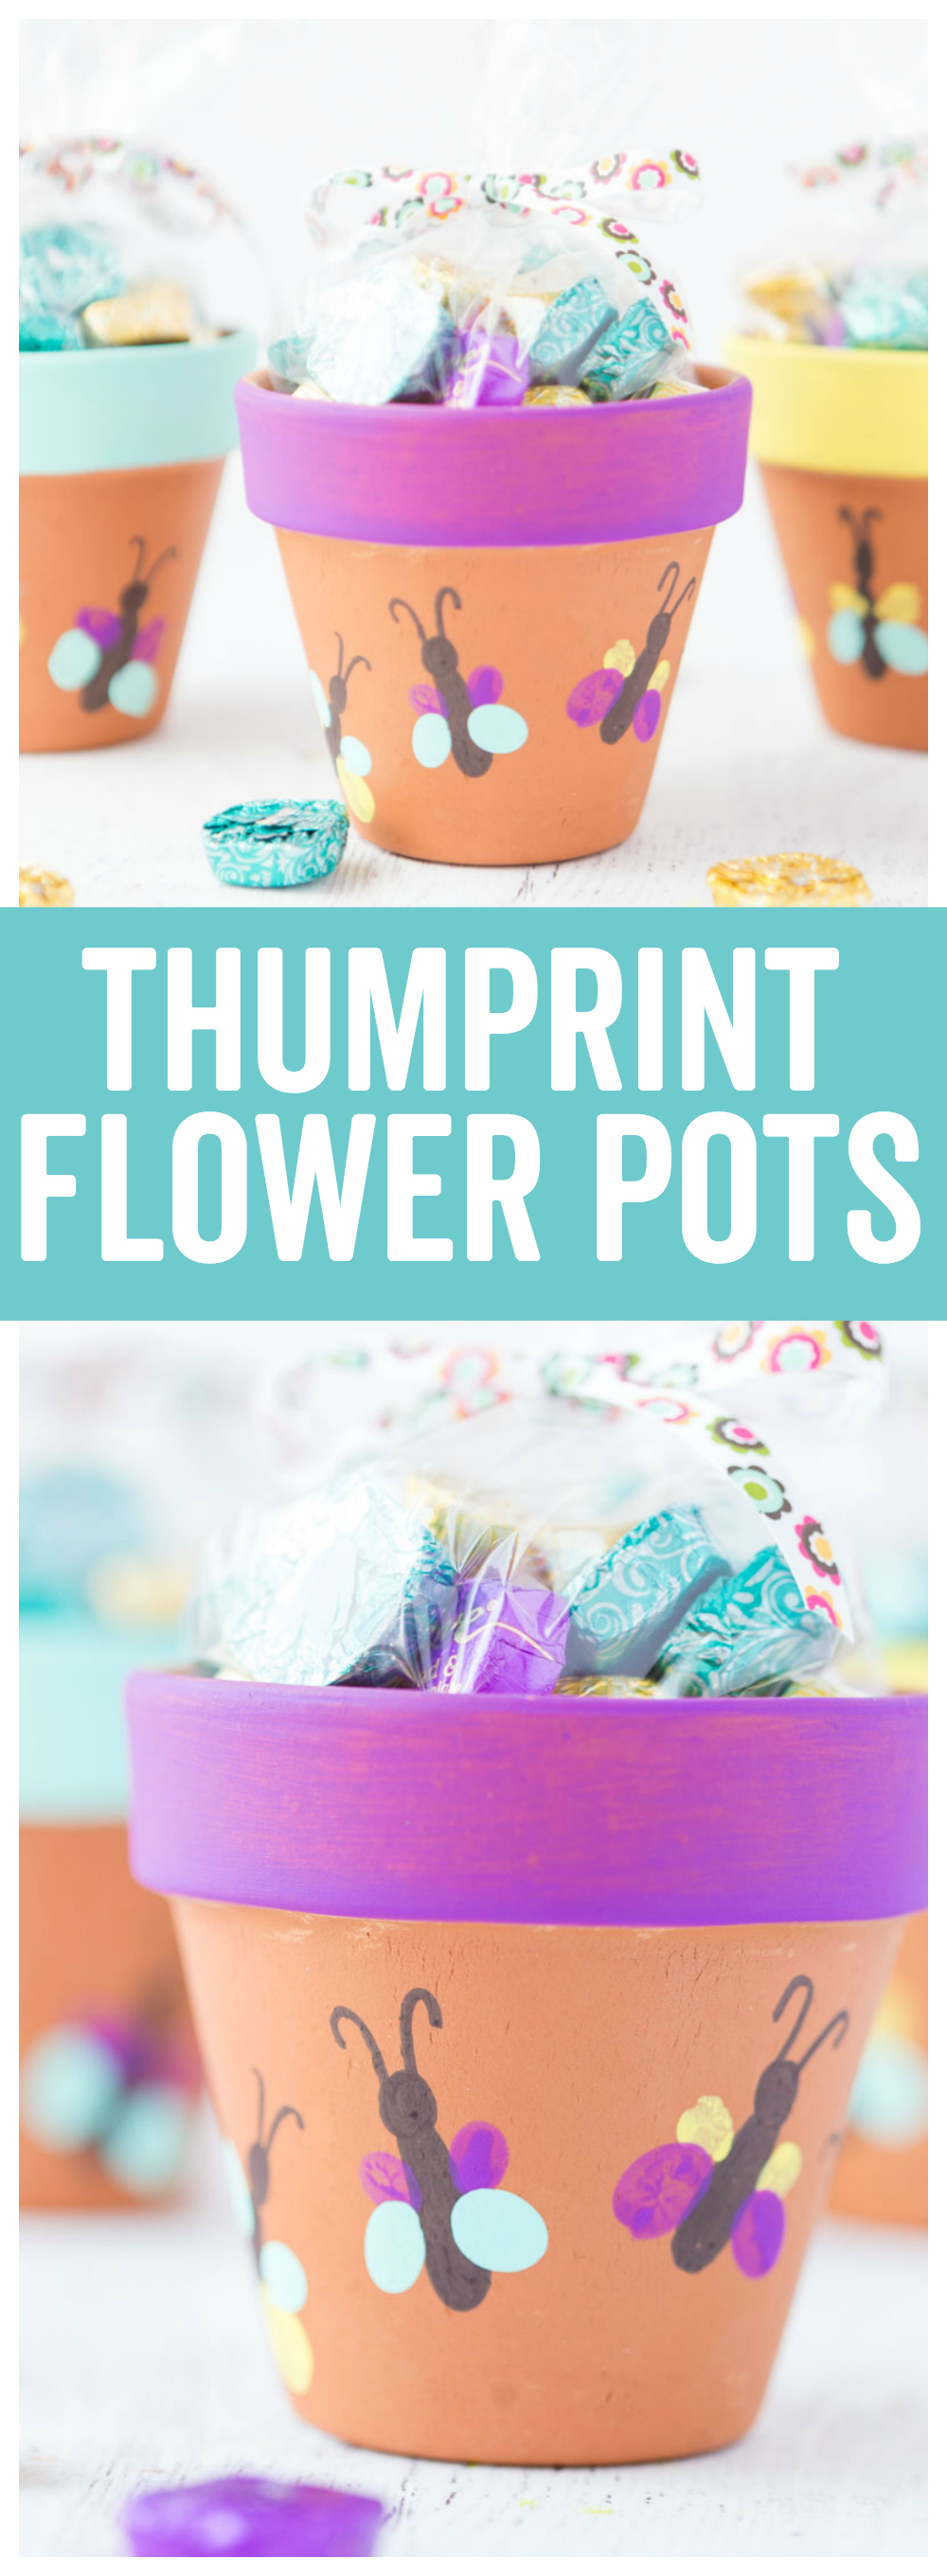 Thumbprint Butterfly Flower Pots: a fun and simple craft idea the kids will love! It makes a great keepsake idea for Mothers Day